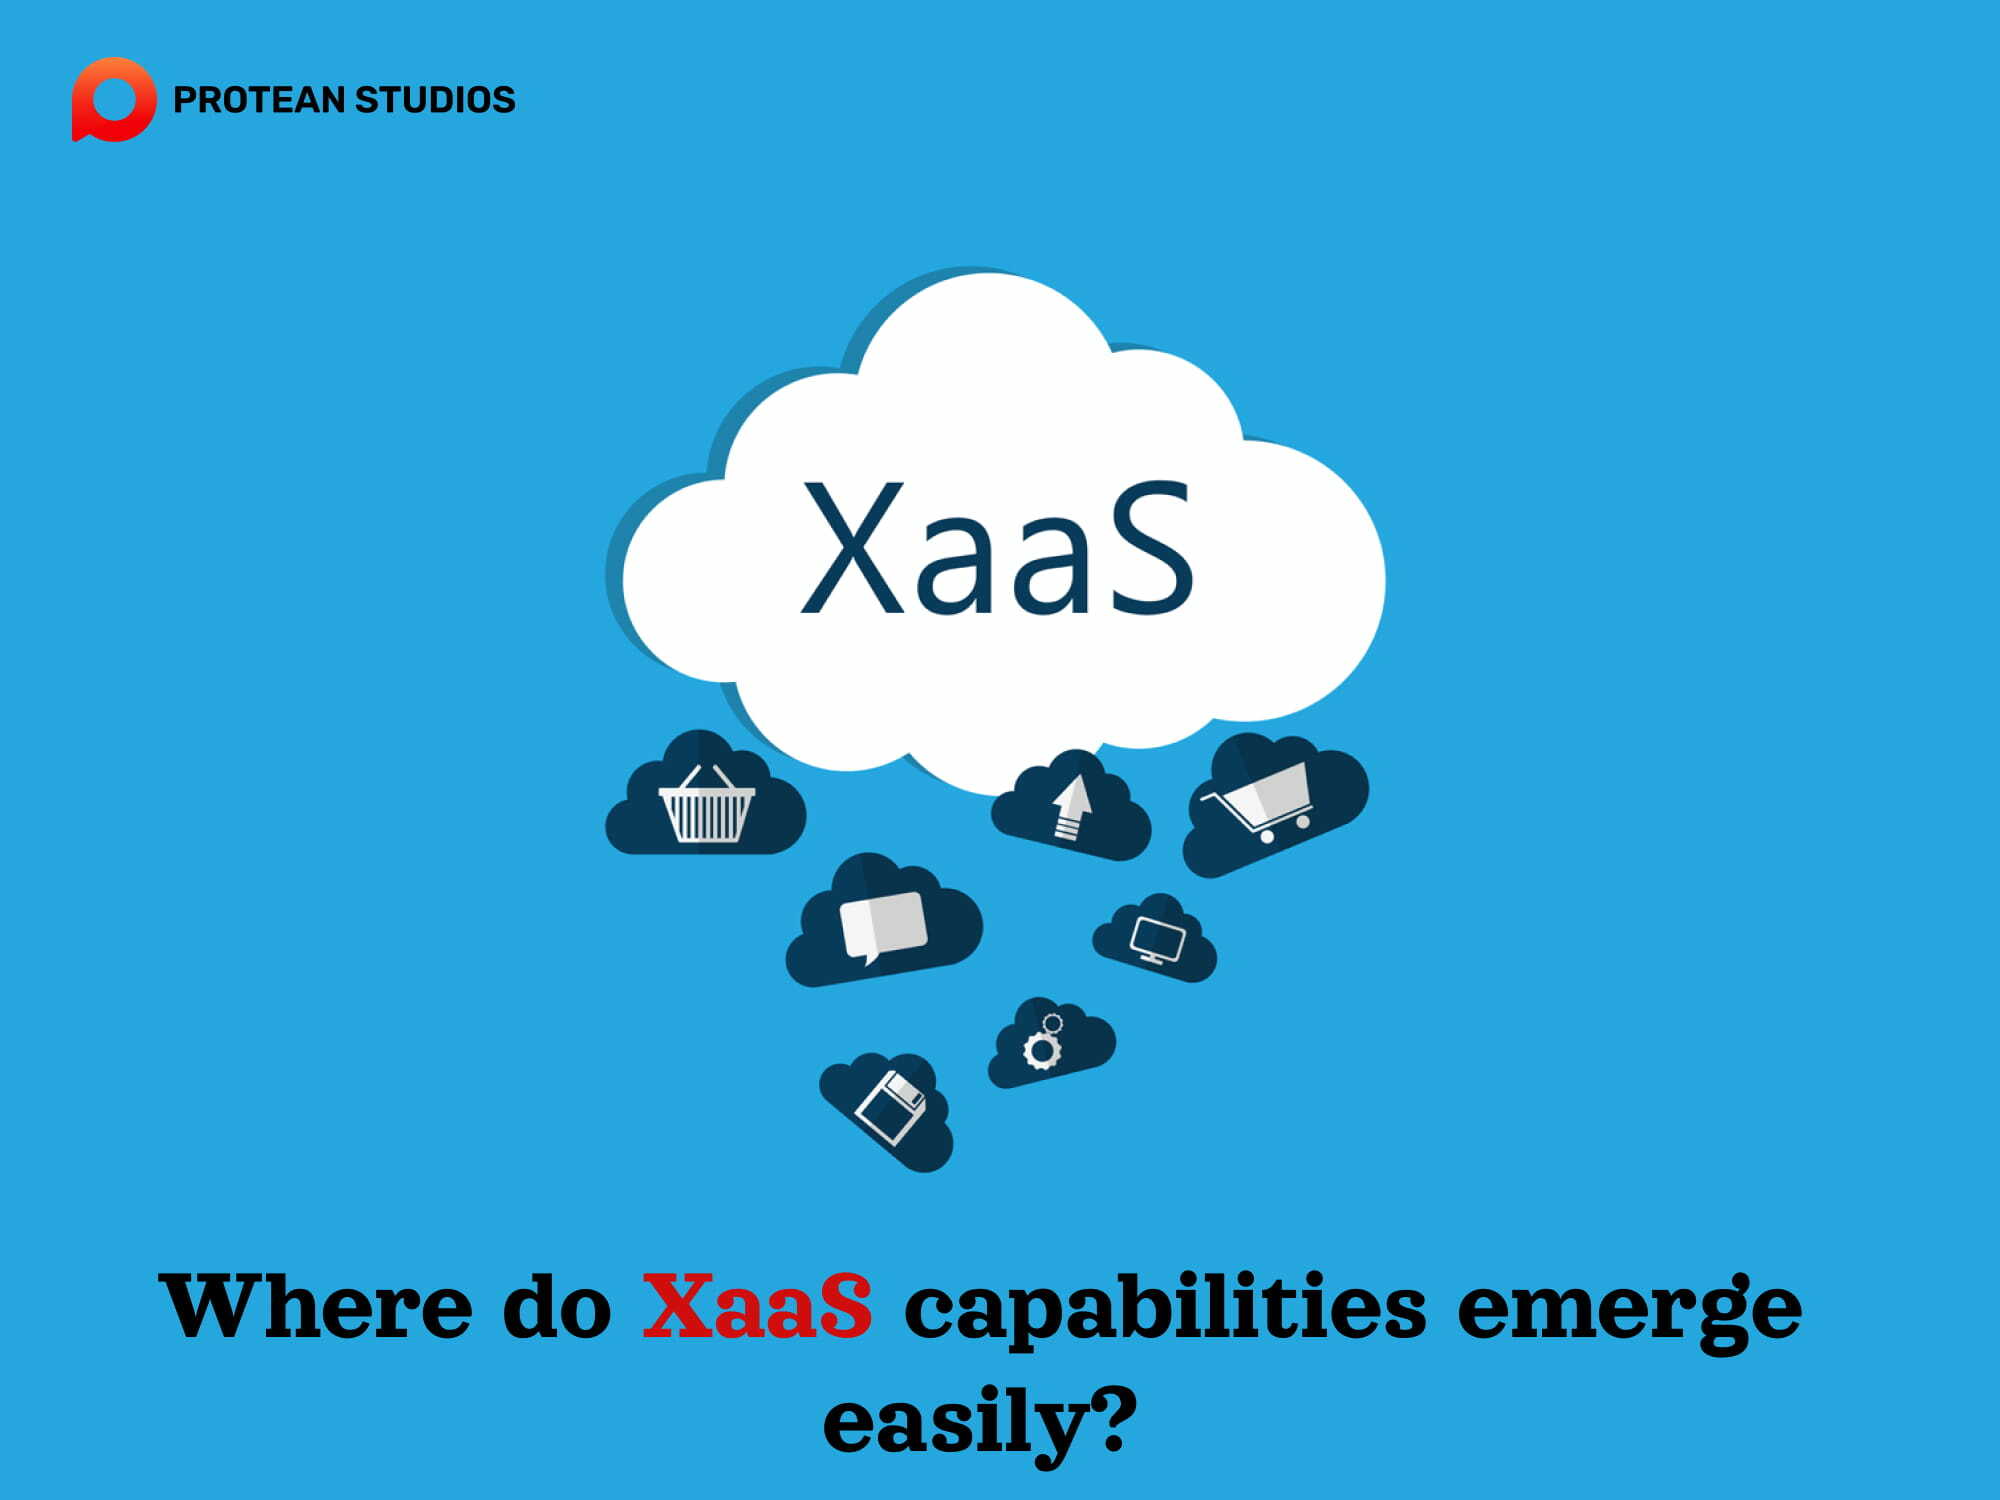 The ERP system is a good application for XaaS